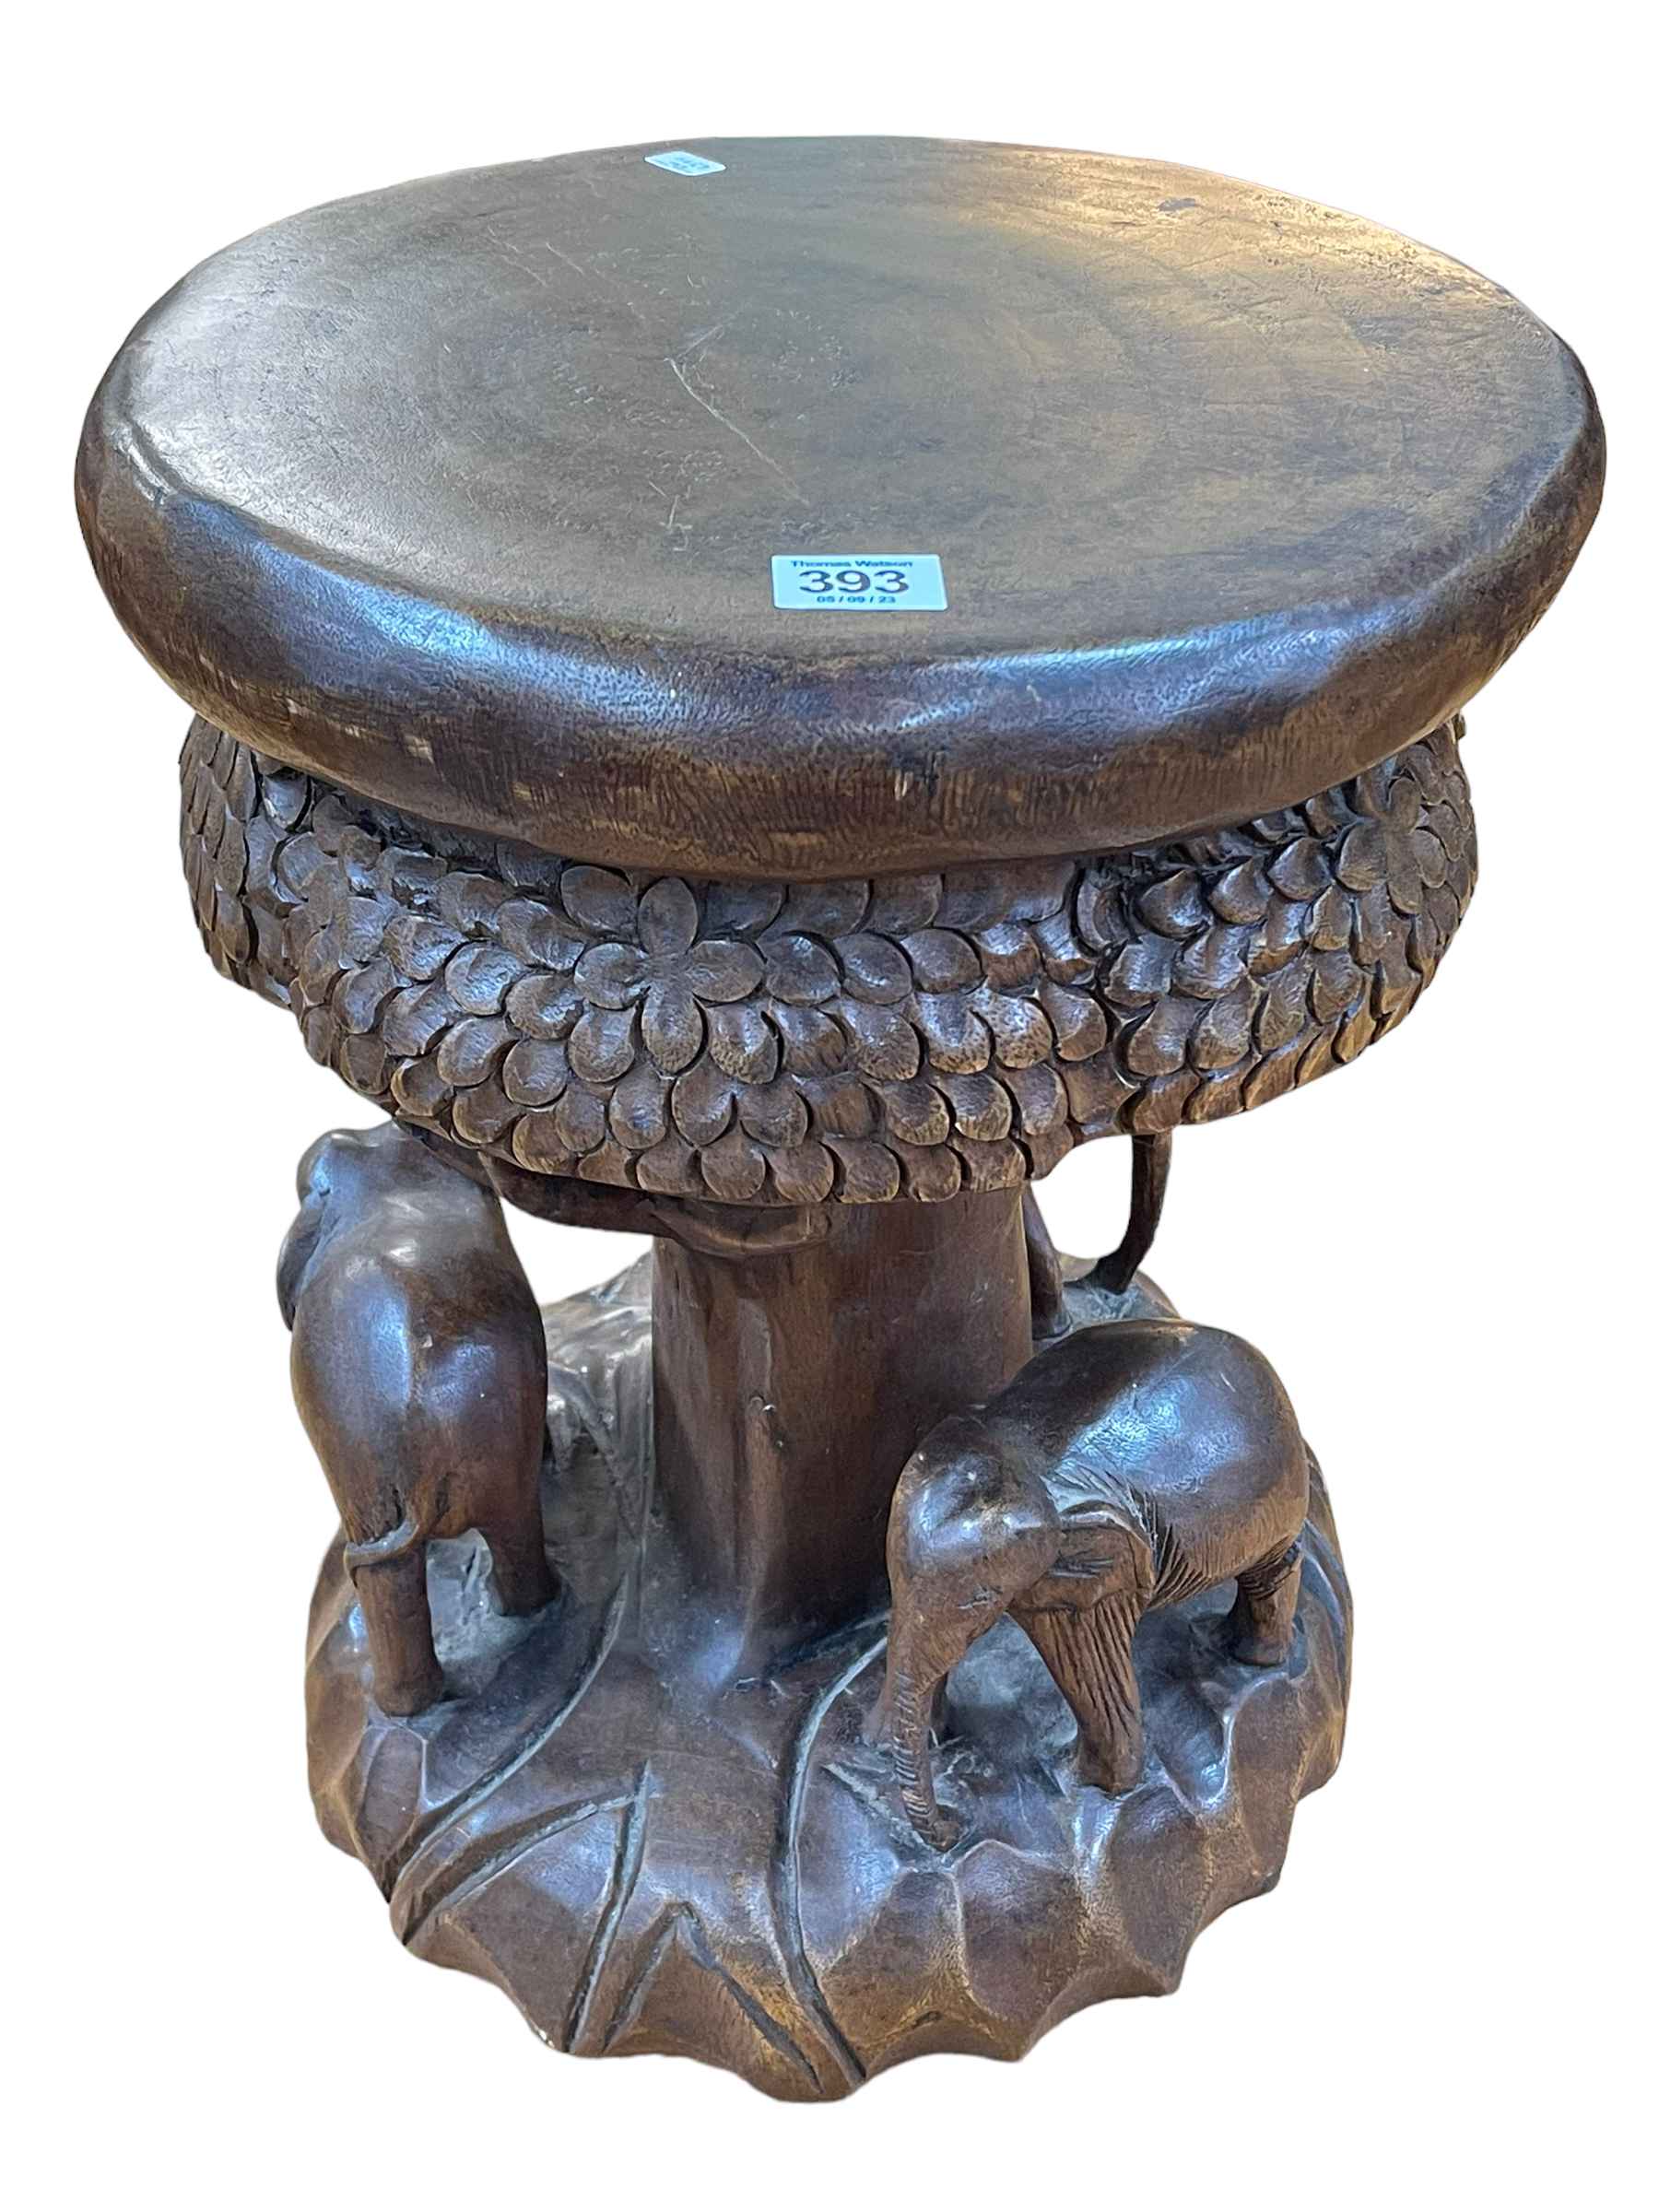 Solid carved wood elephant stool, 41cm high.